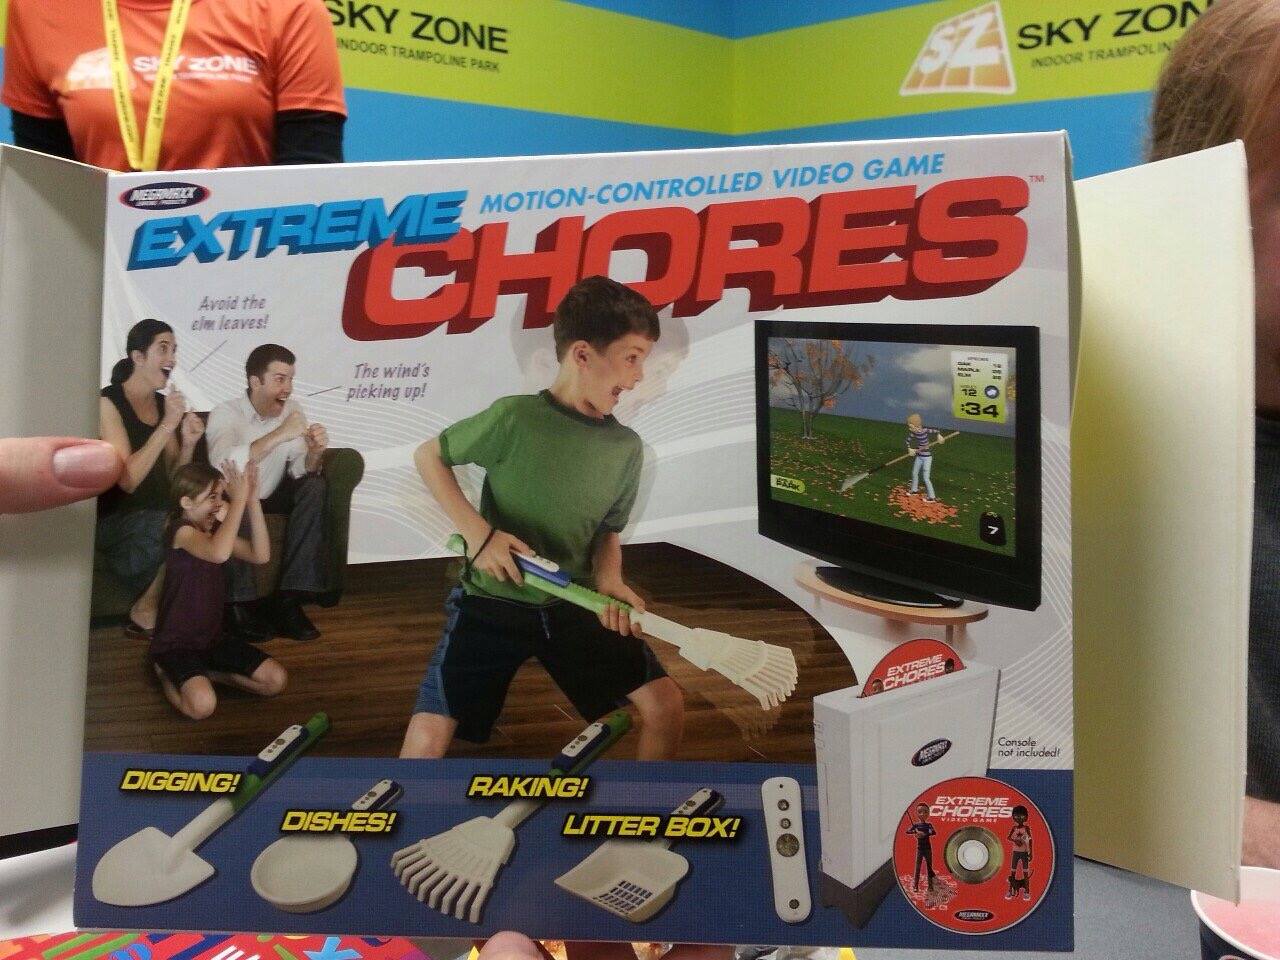 chores video game, worst game ever